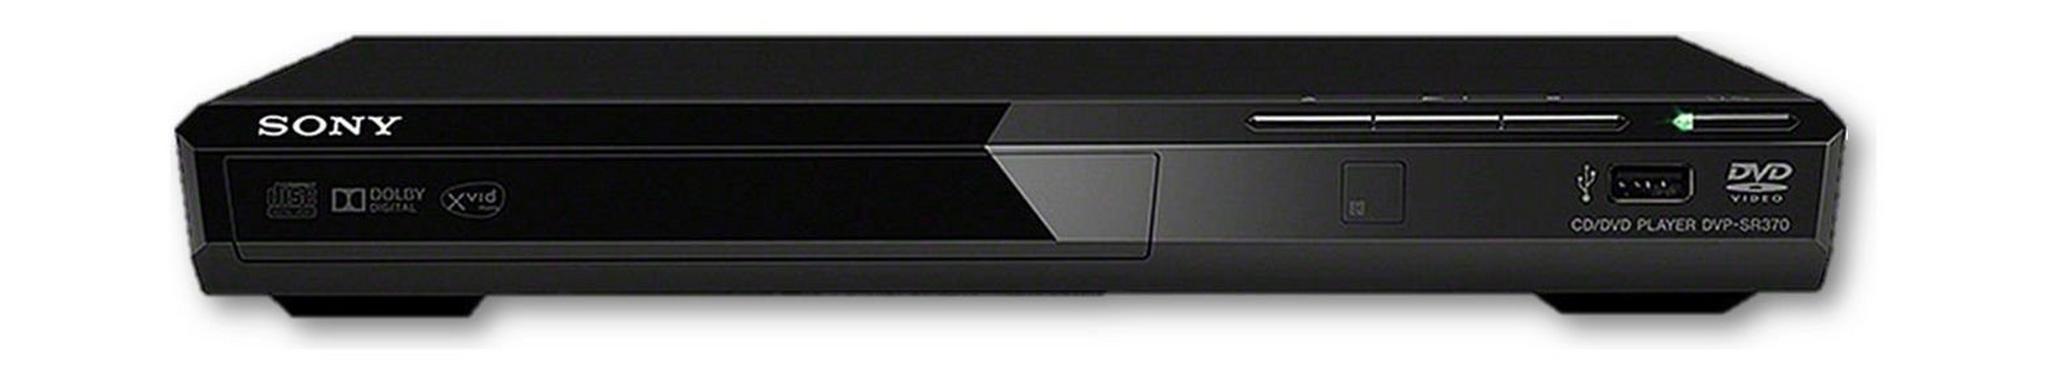 Sony DVD Player with USB Connectivity - DVPSR370HP